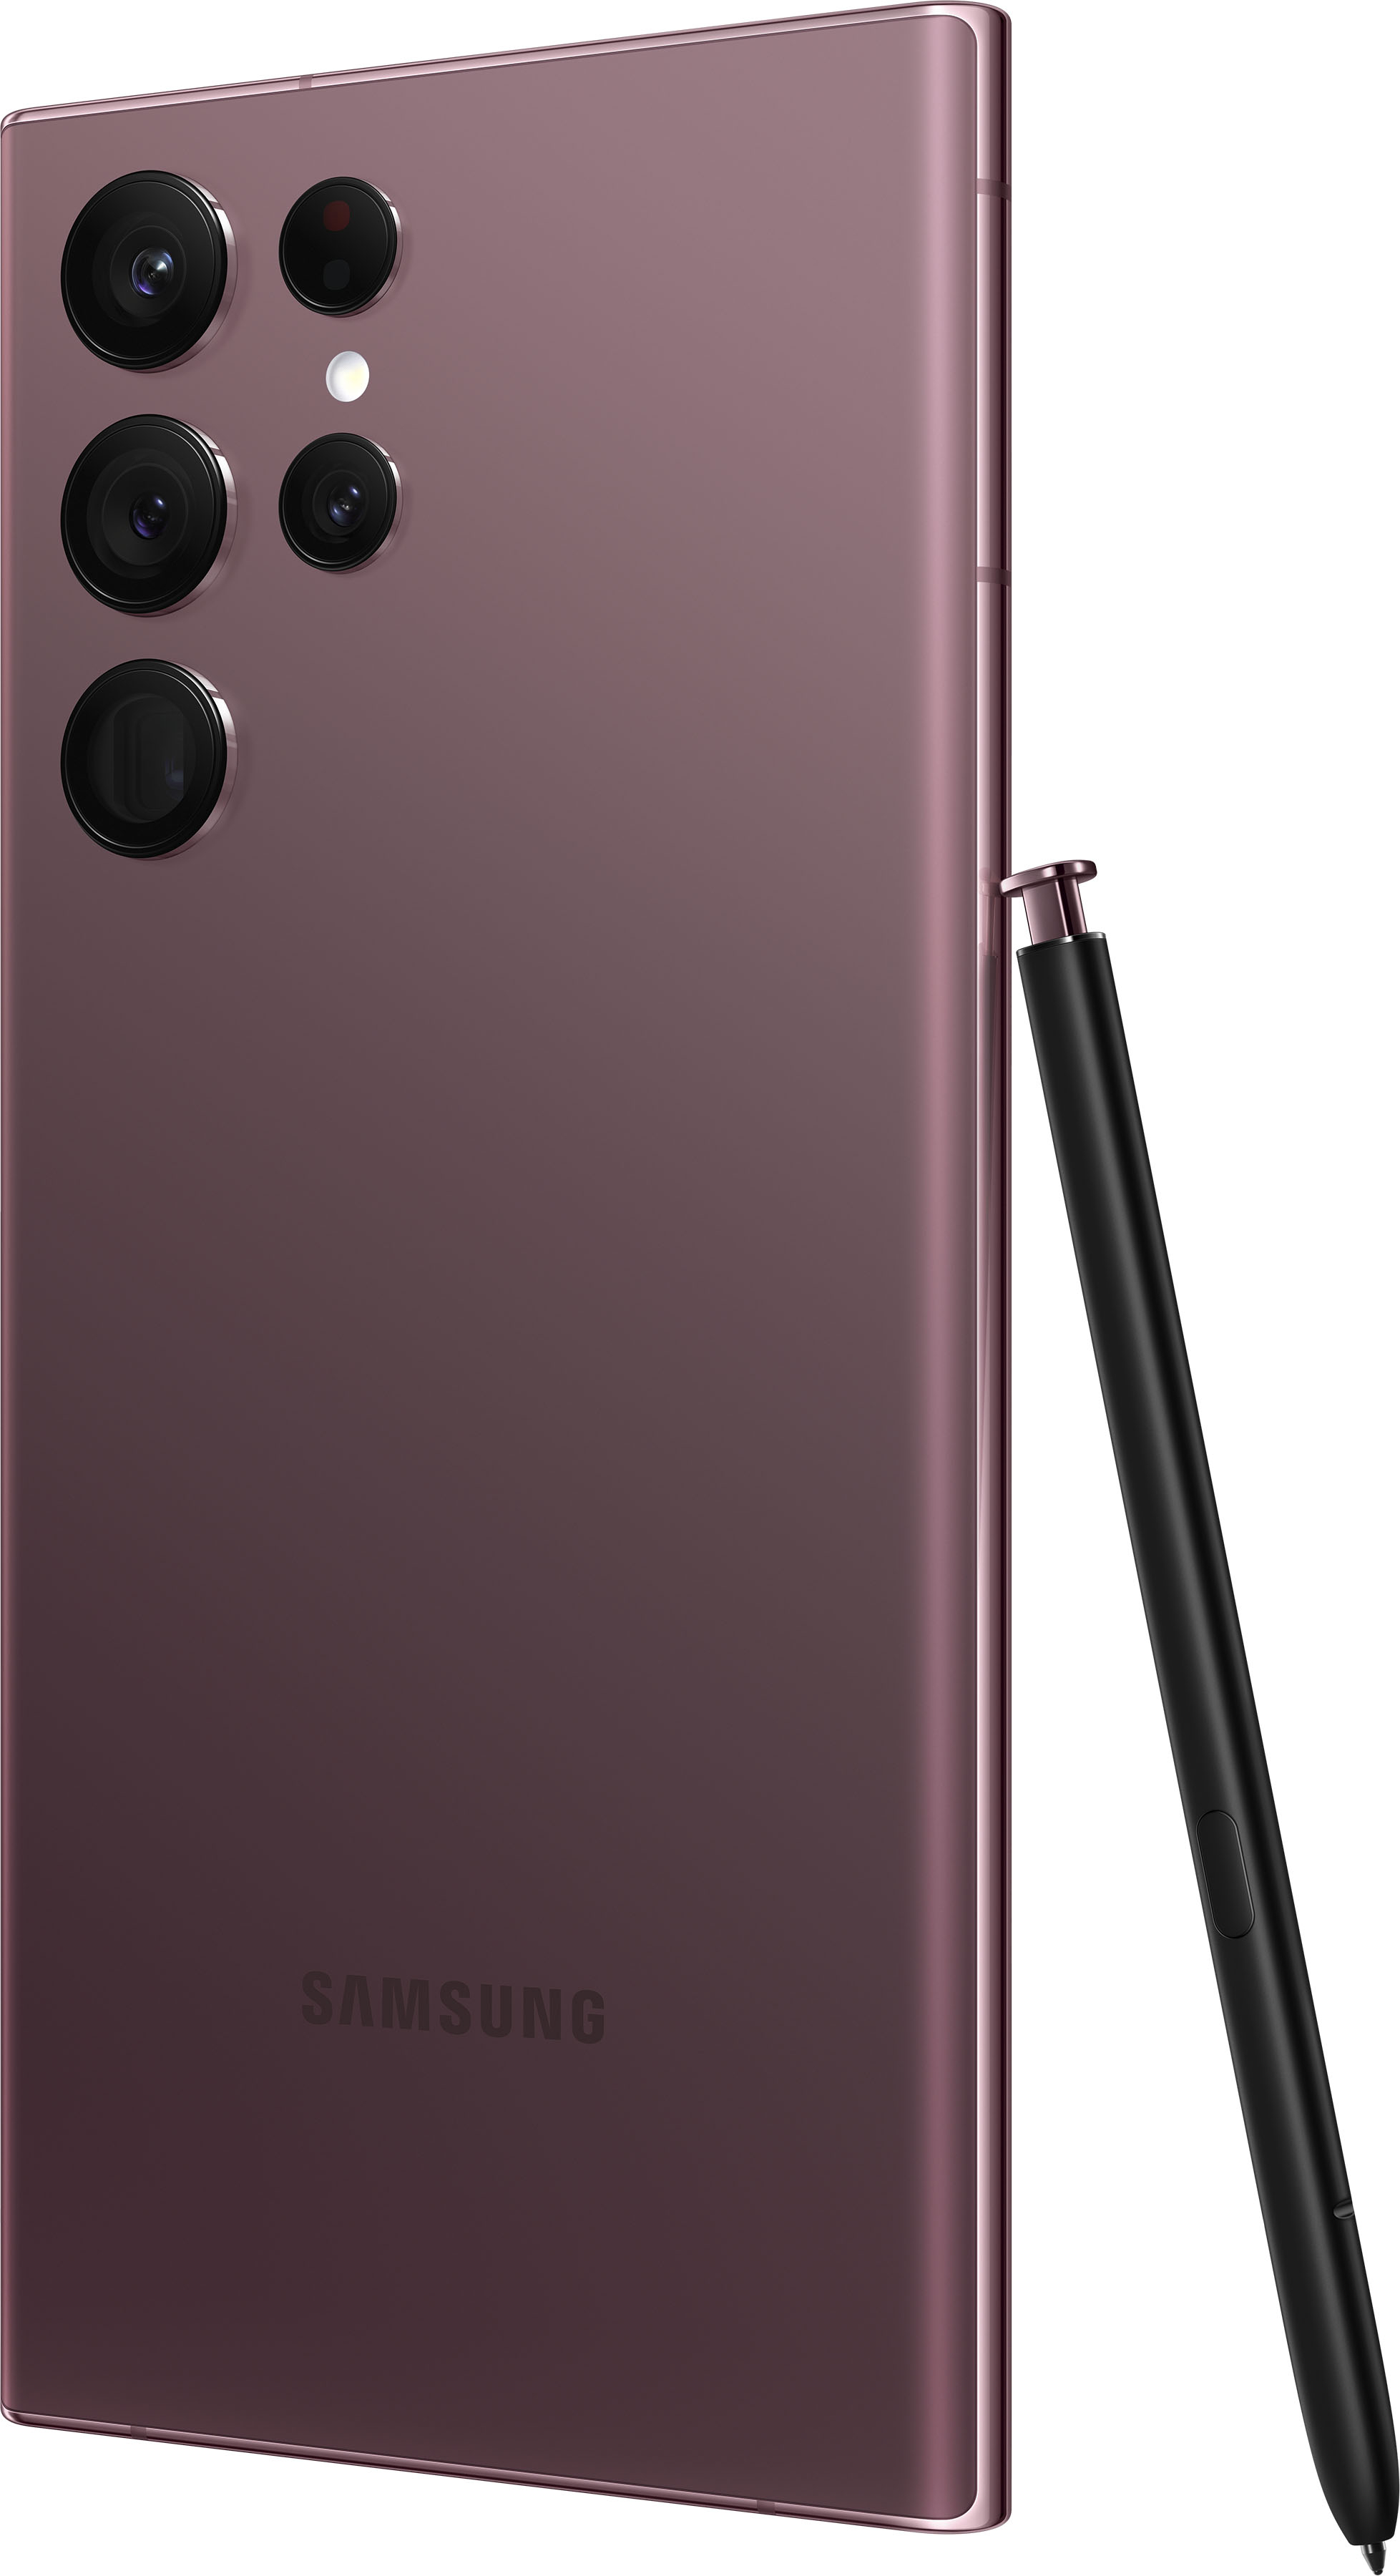  Original S21 Ultra 12GB+512GB Global Version Android Smartphone  with Stylus Support 4G 5G Network Rose Gold (Rose Gold) : Cell Phones &  Accessories